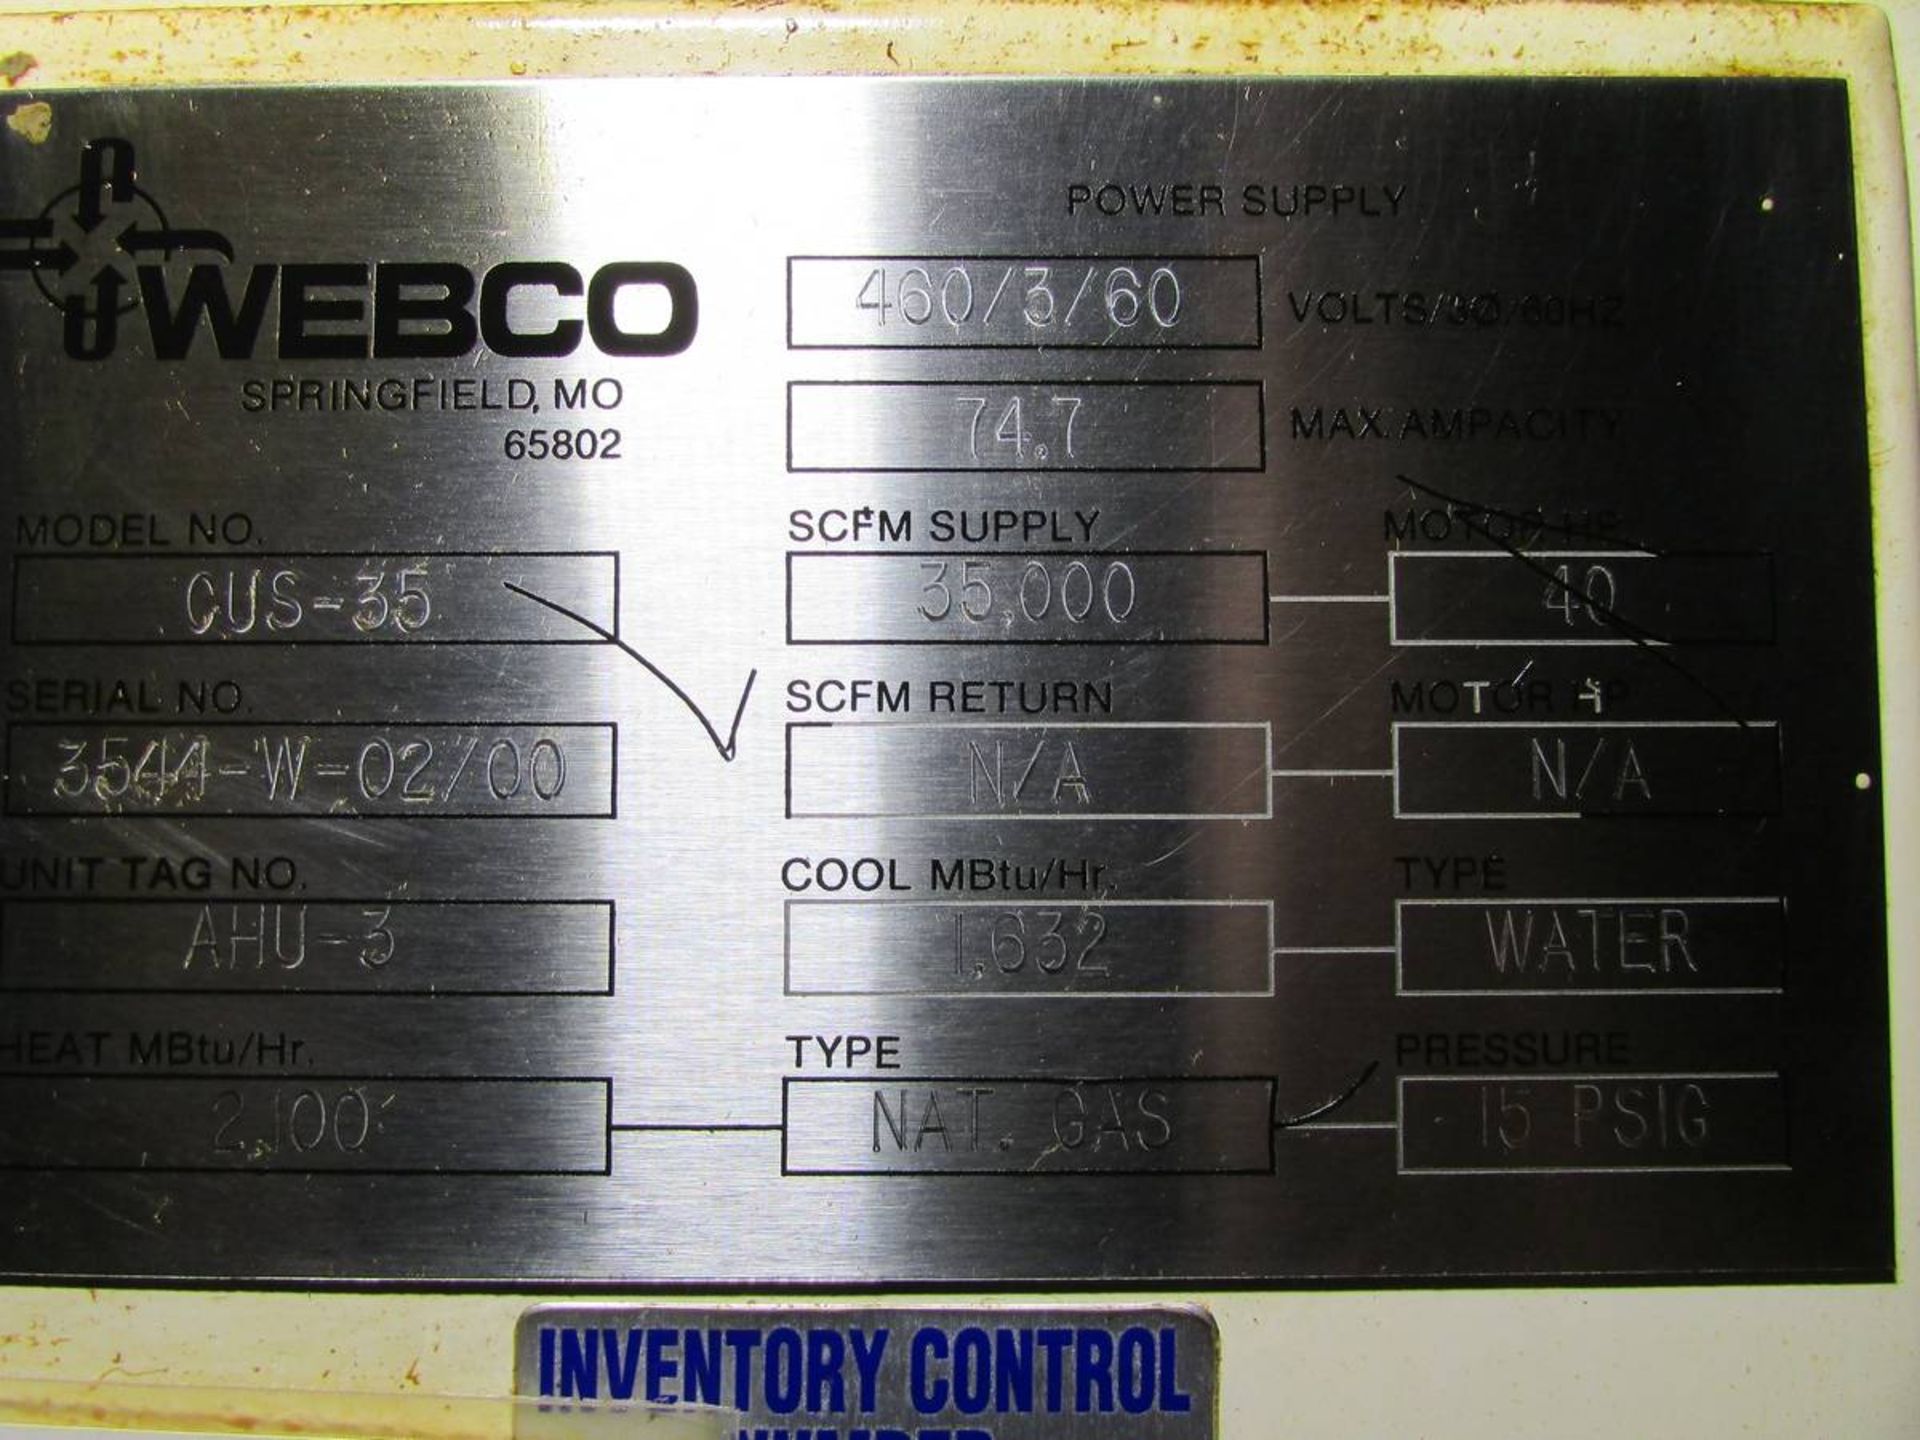 2000 Webco CUS-35 Overhead Air Handling Unit - Image 16 of 16